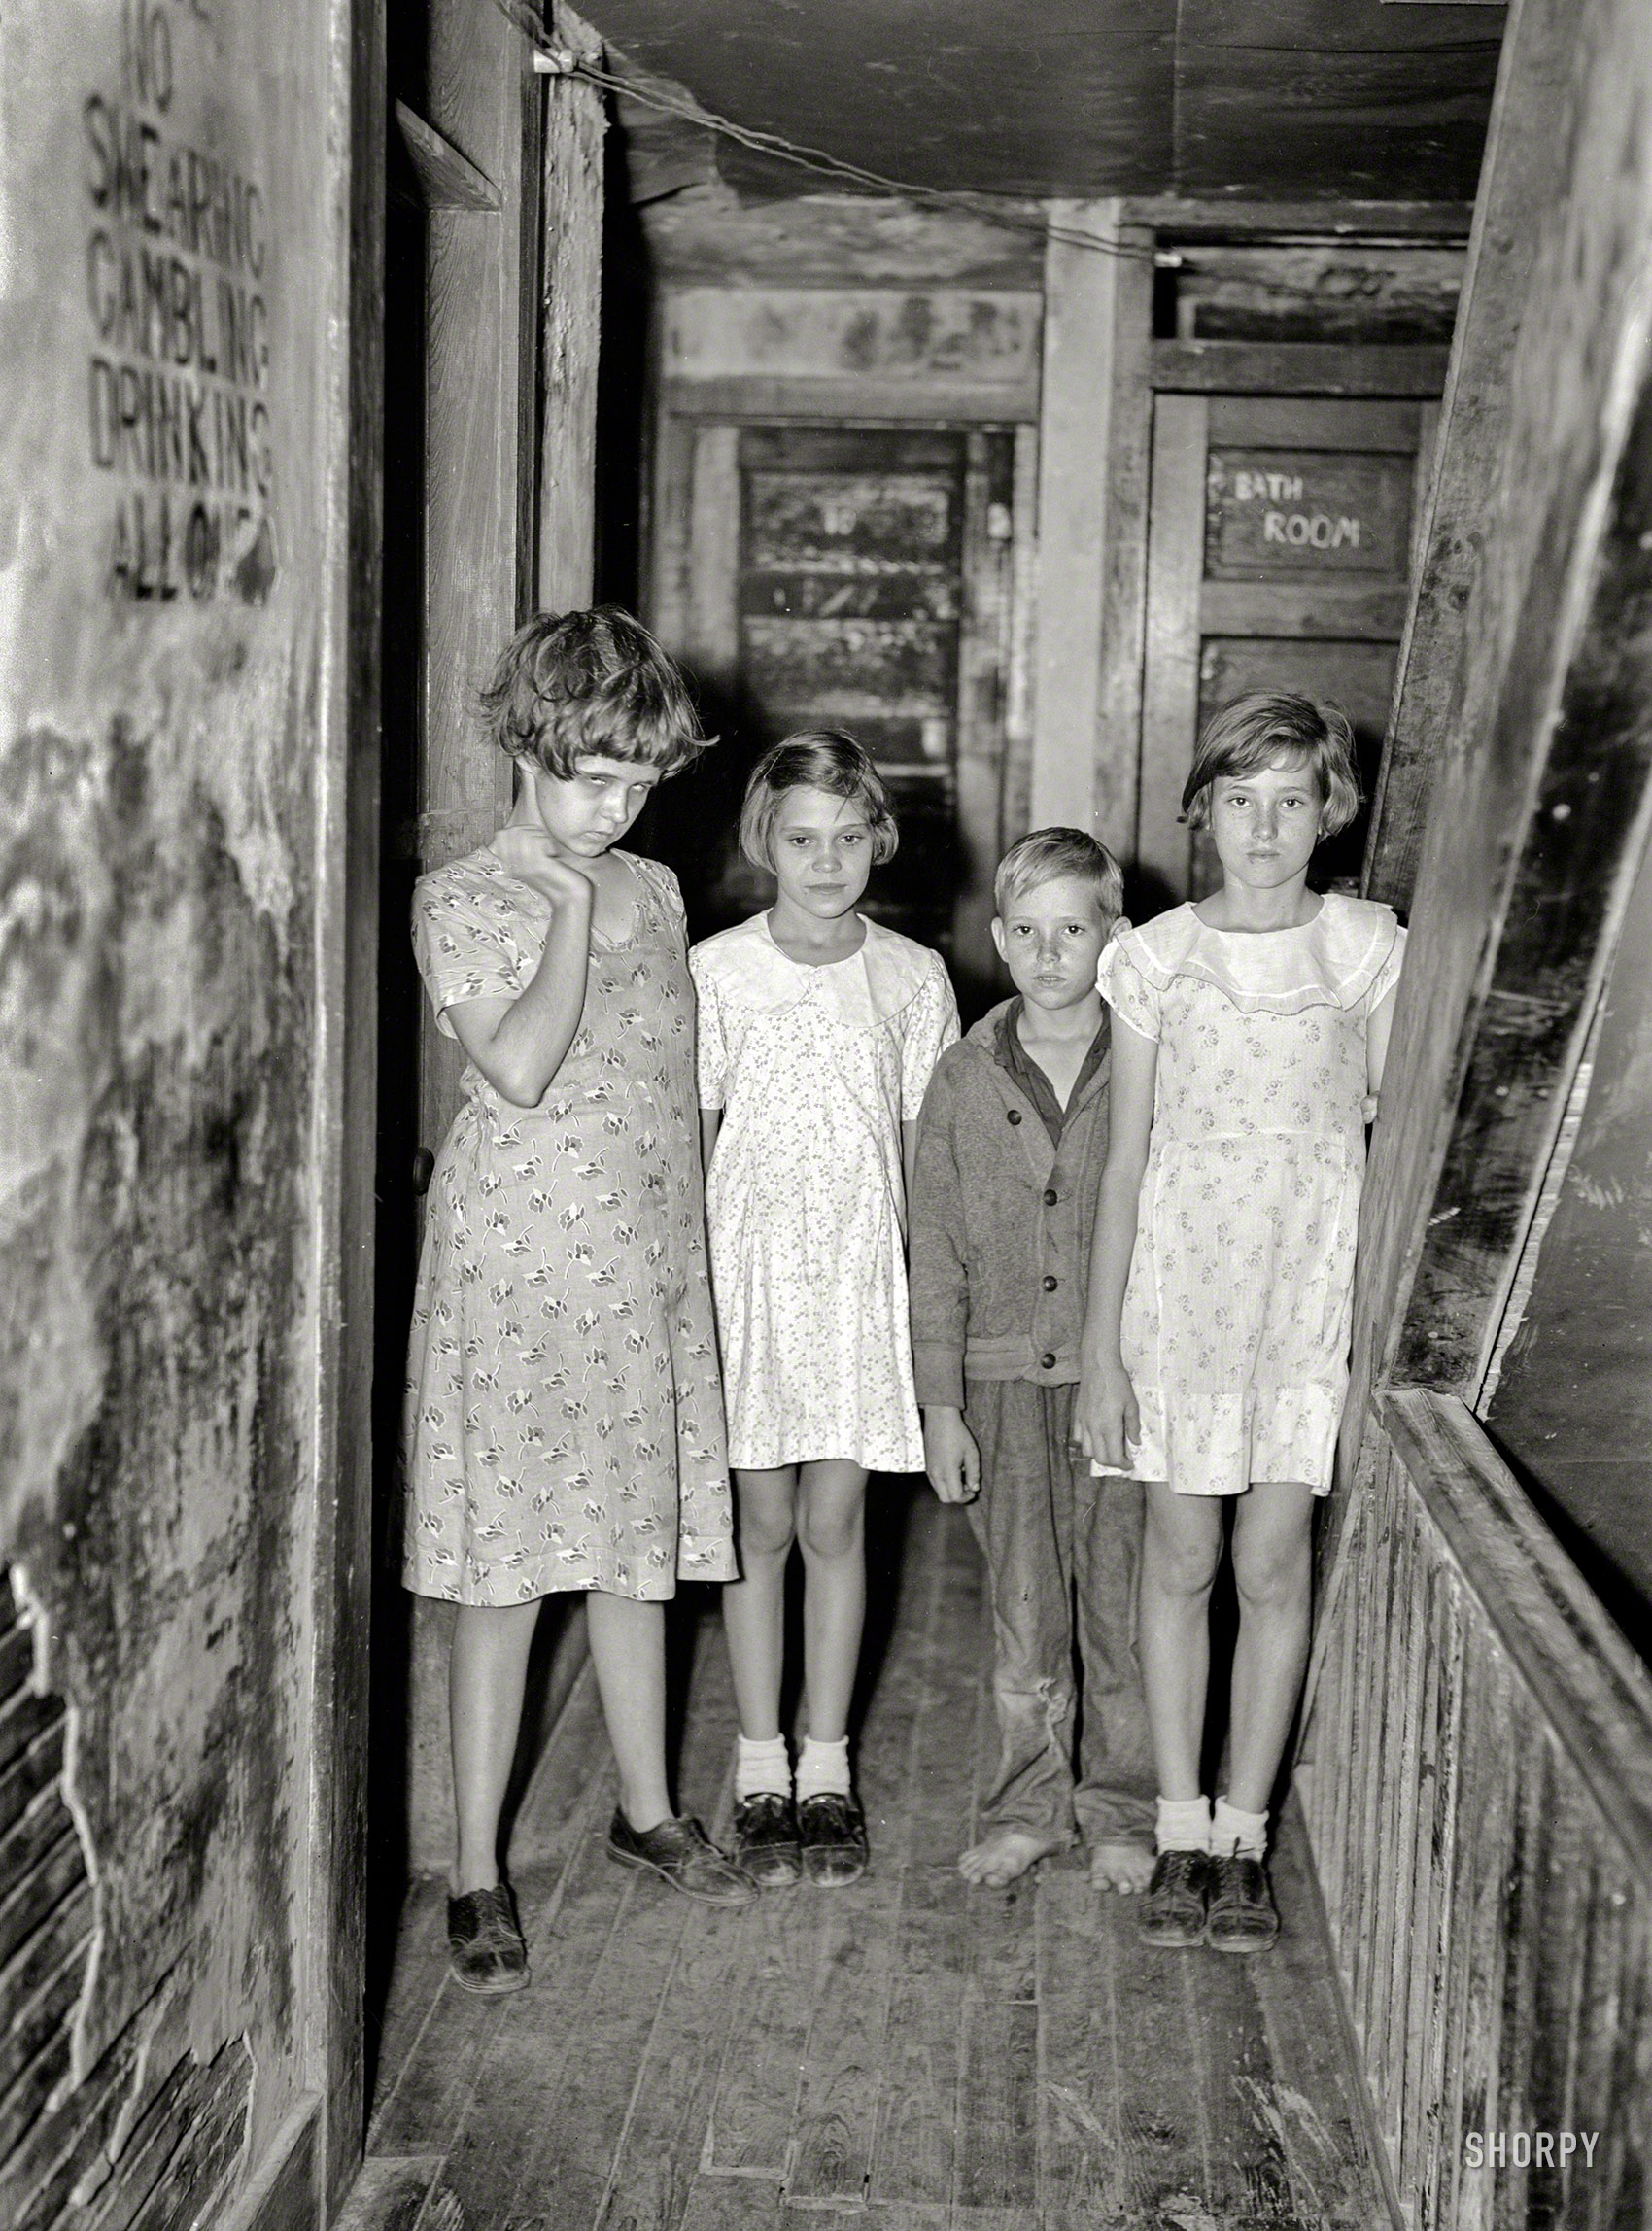 January 1937. "Children of citrus workers in hallway of apartment house. Winter Haven, Fla." Swearing, Gambling and Drinking, with their little brother Allowed. Photo by Arthur Rothstein, Resettlement Administration. View full size.